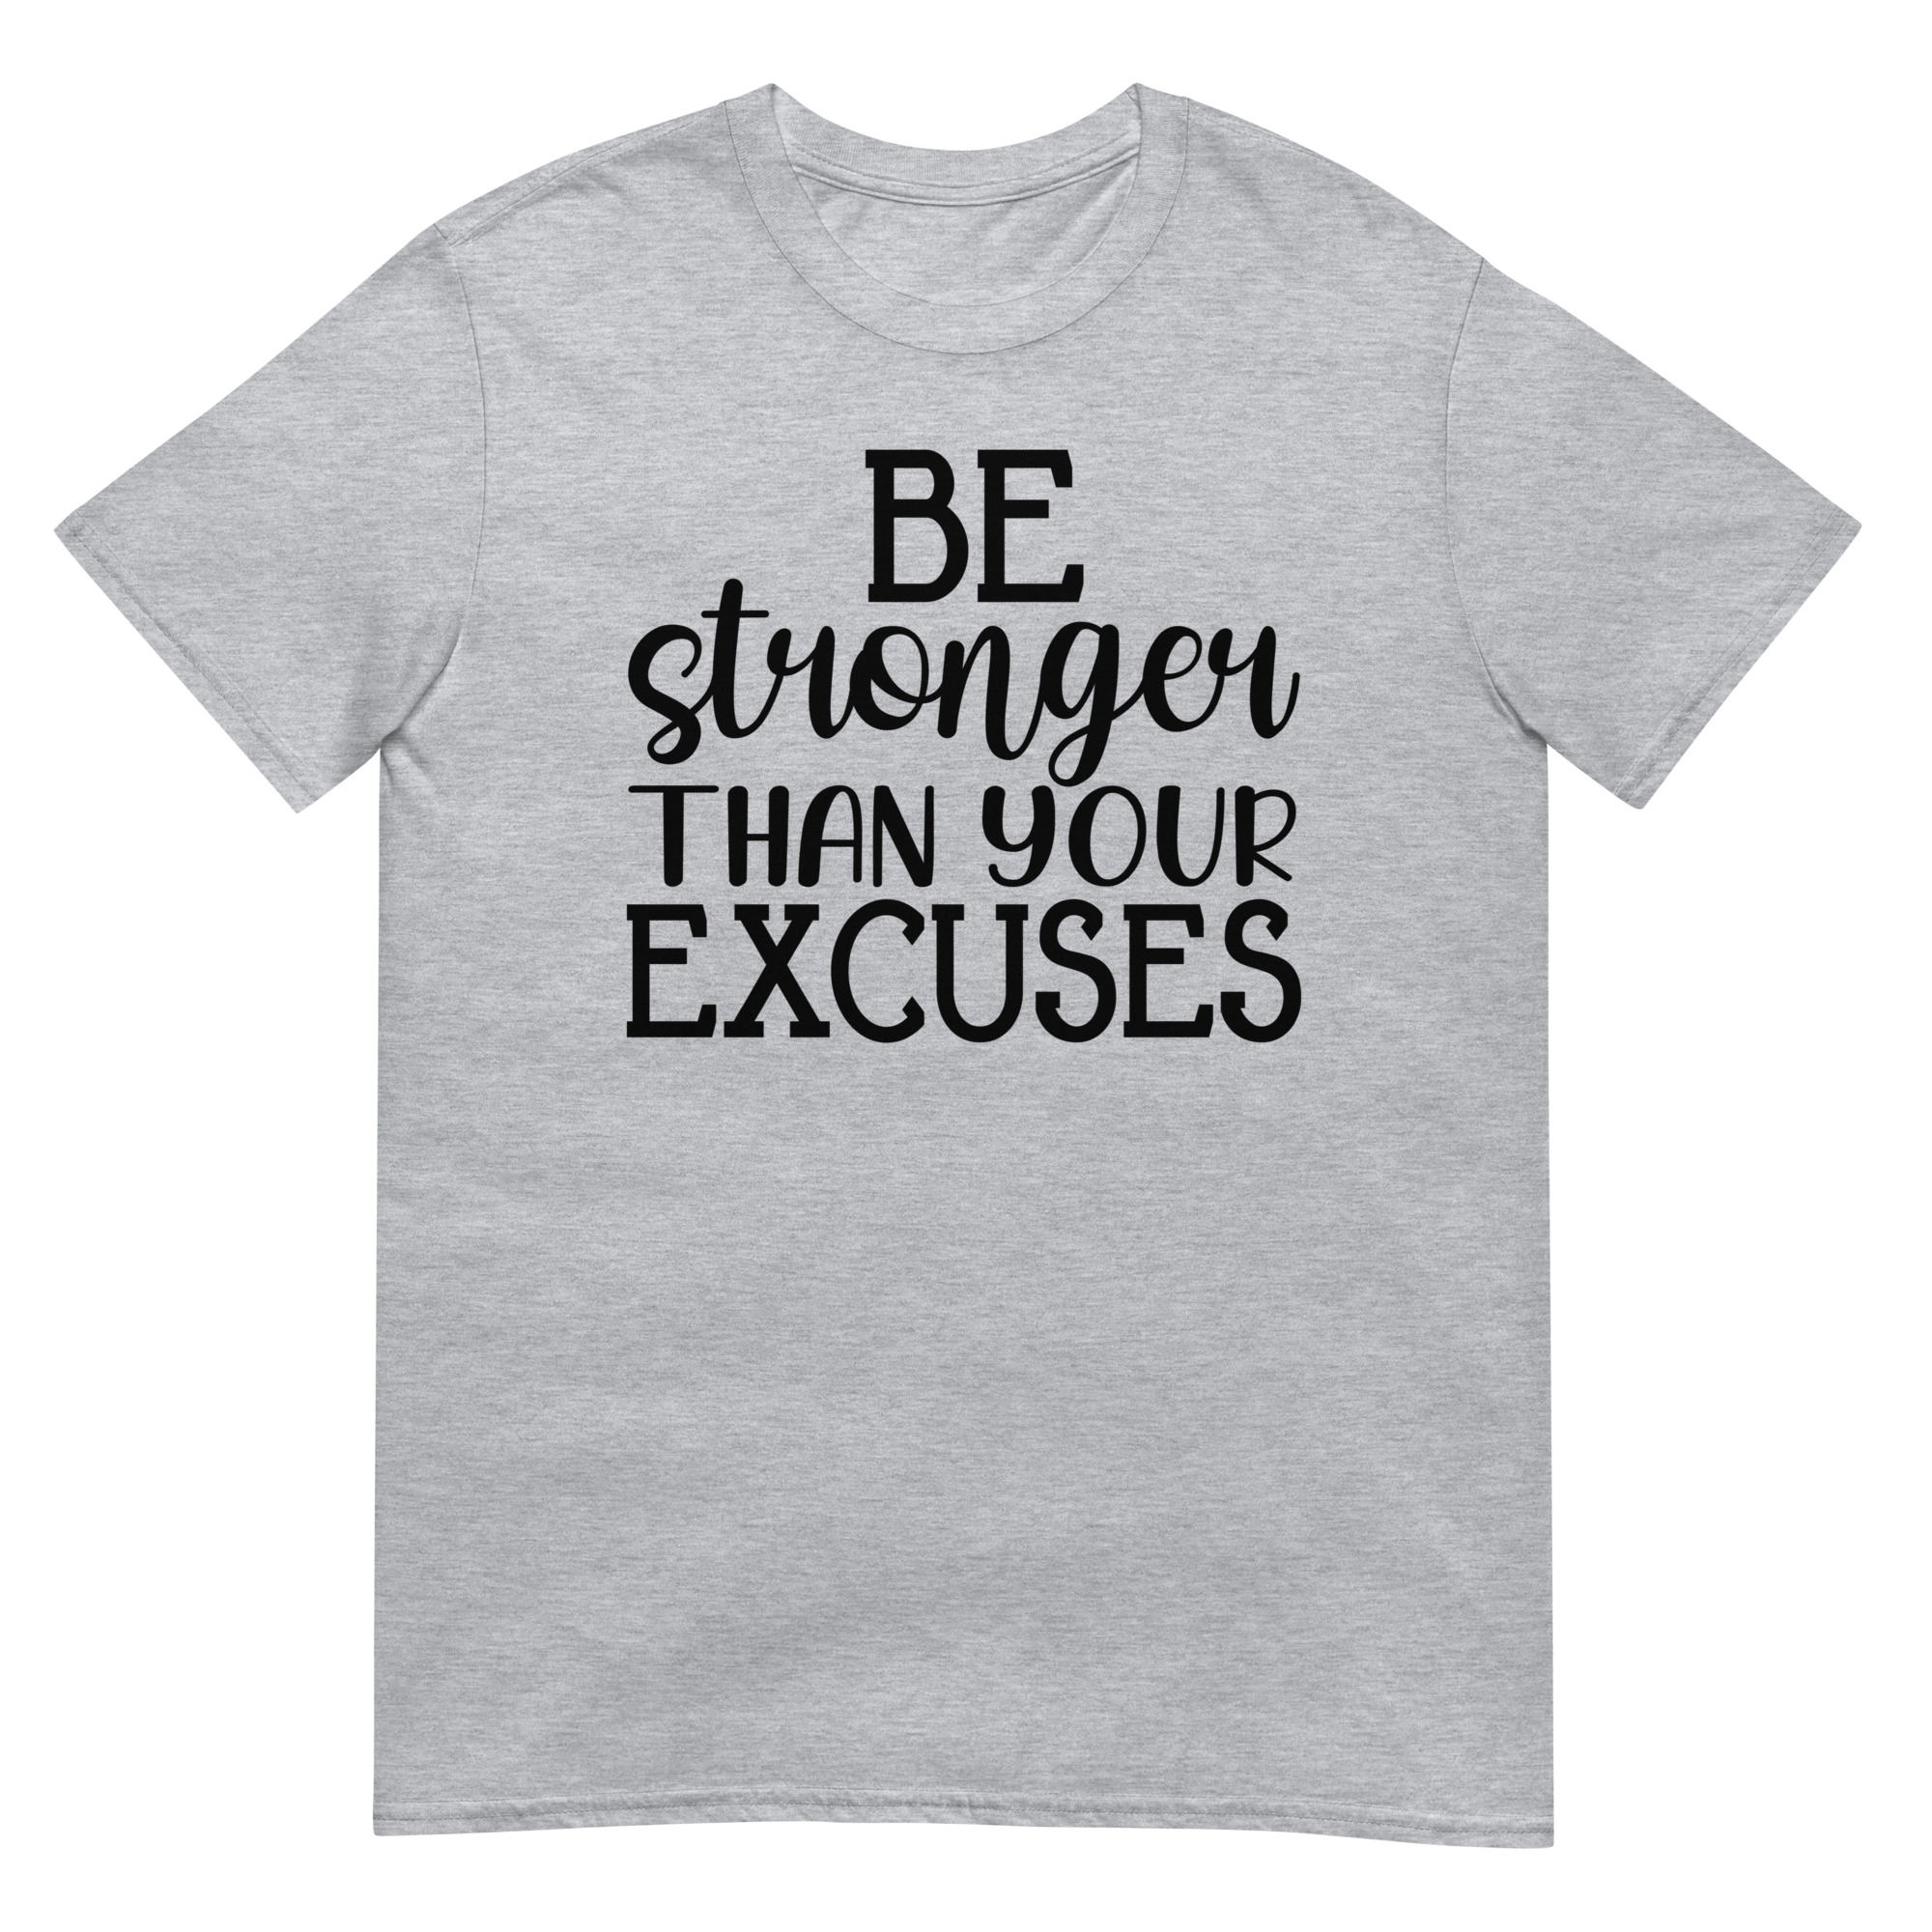 Be Stronger Than Your Excuses - Unisex Motivational Quote T-Shirt